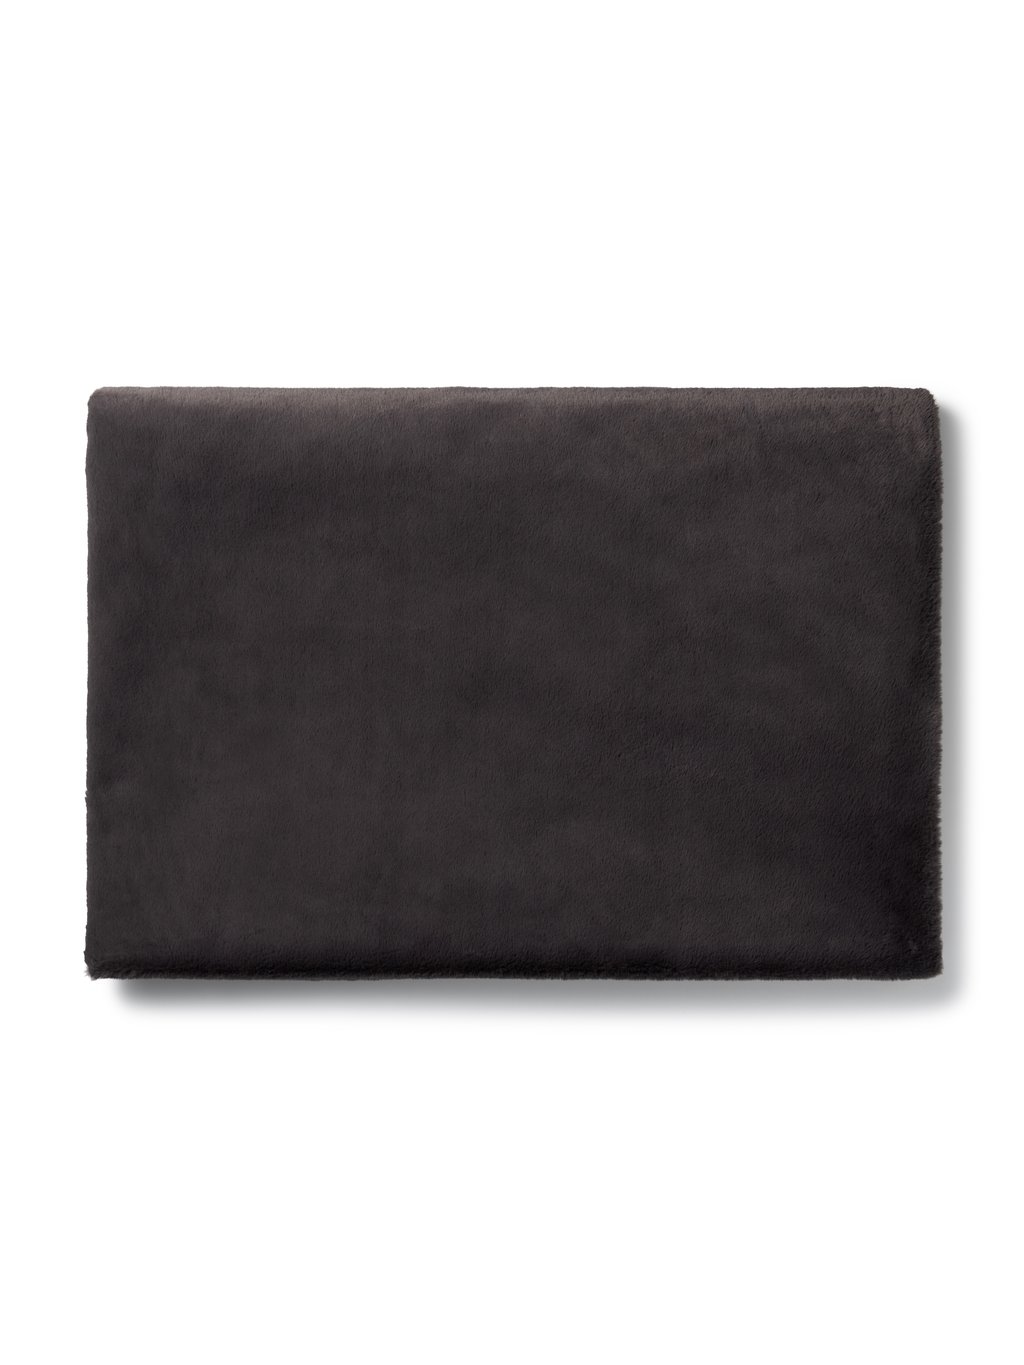 Just So Interiors Charcoal Faux Fur Throw